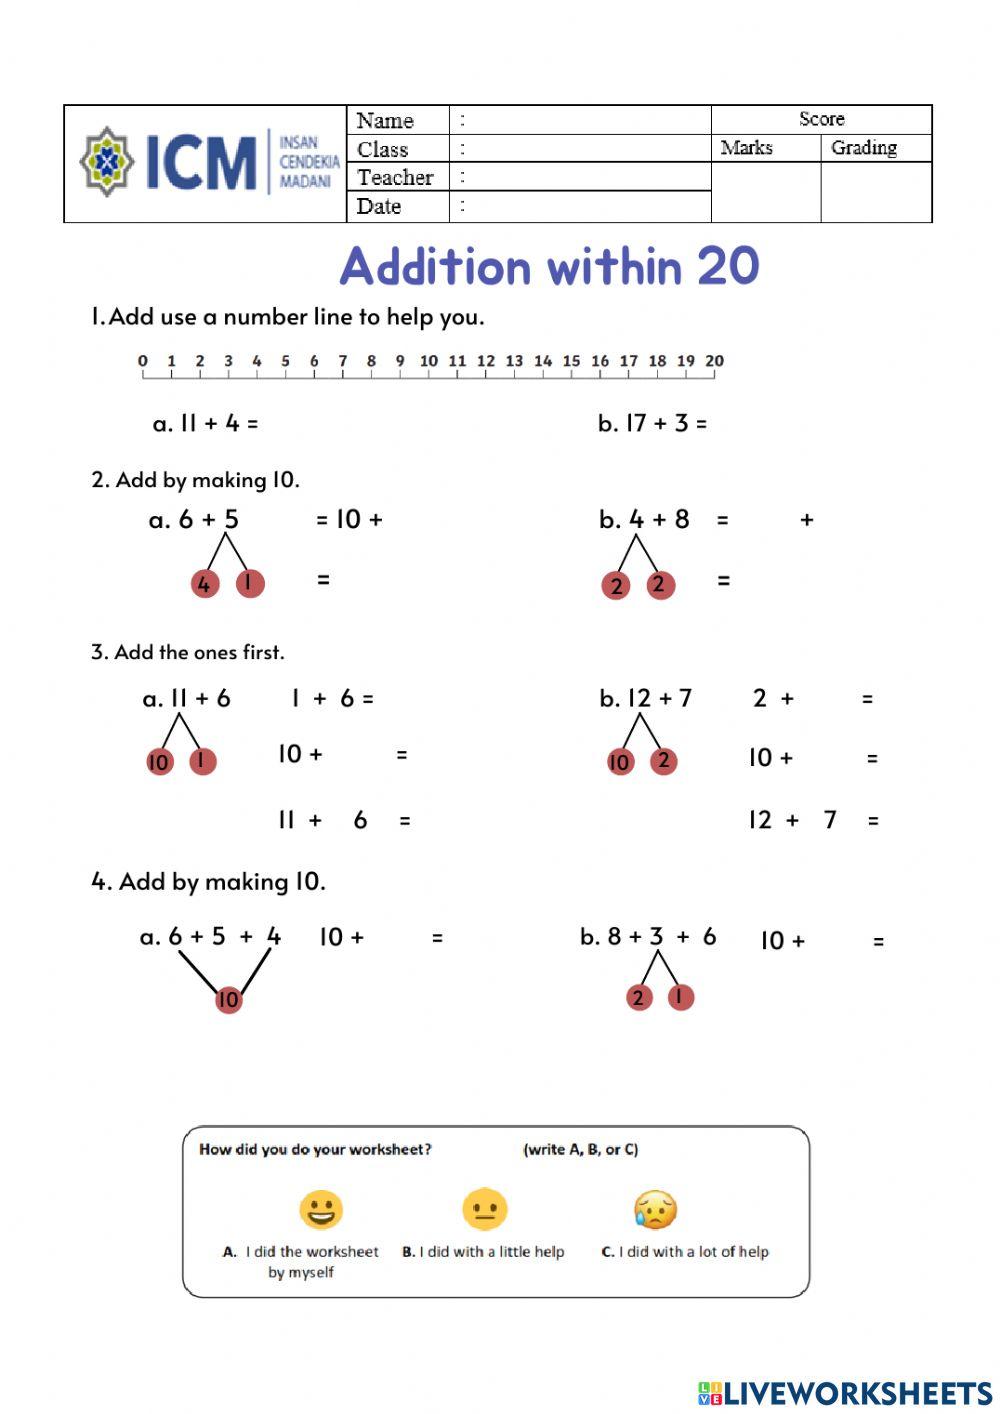 Addition within 20